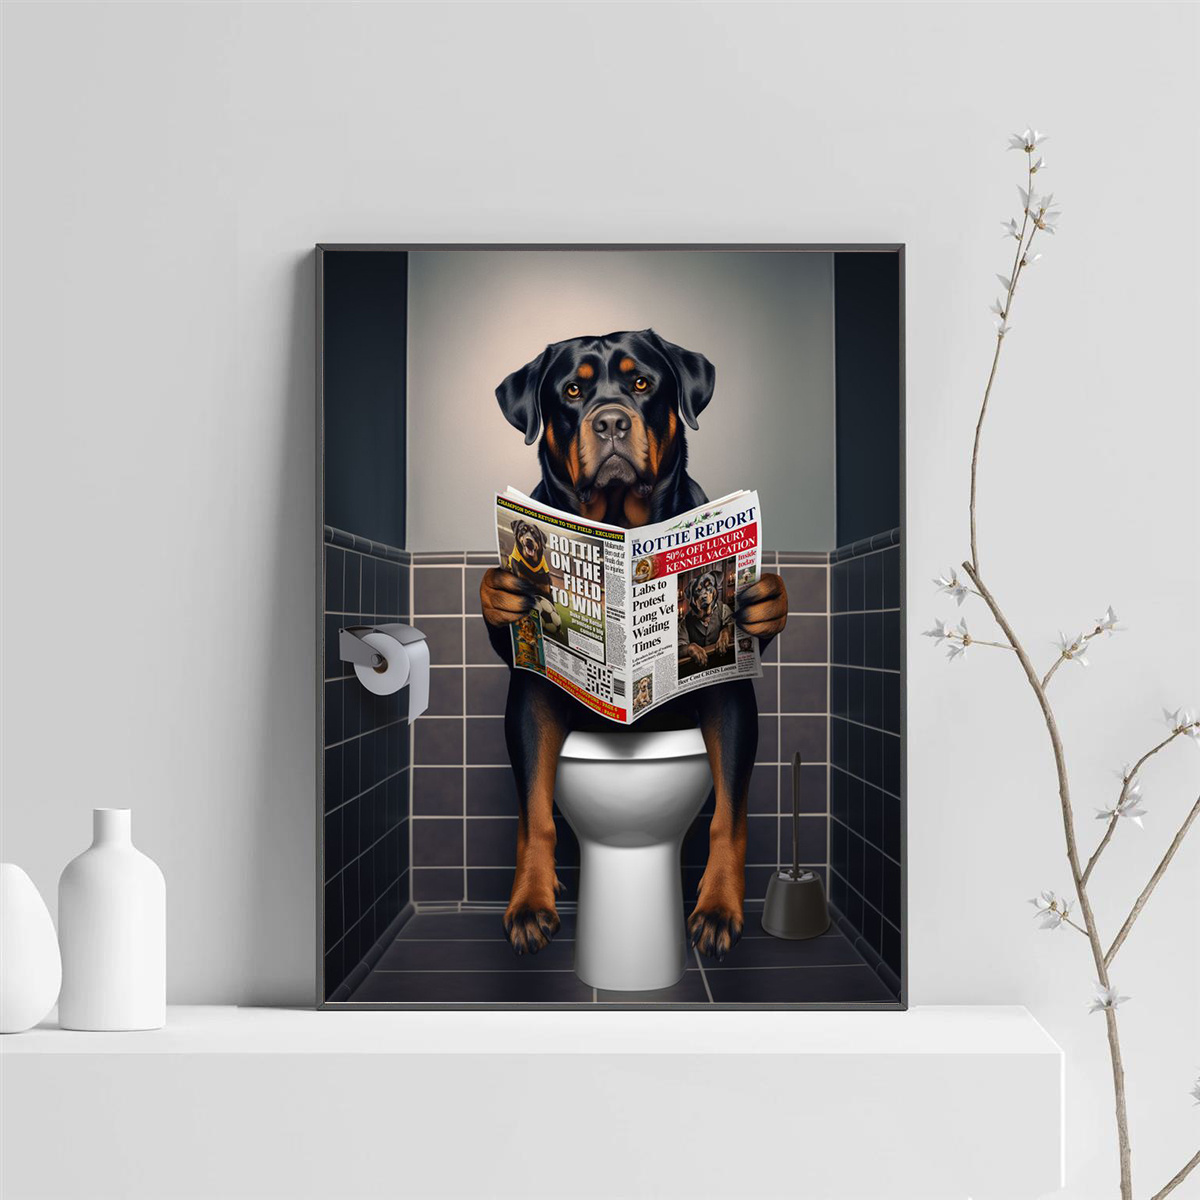 

Funny Rottweiler On Toilet Canvas Art, 12x16" - Frameless Wall Decor For Home, Office, Cafe | Quirky Bathroom & Living Room Poster